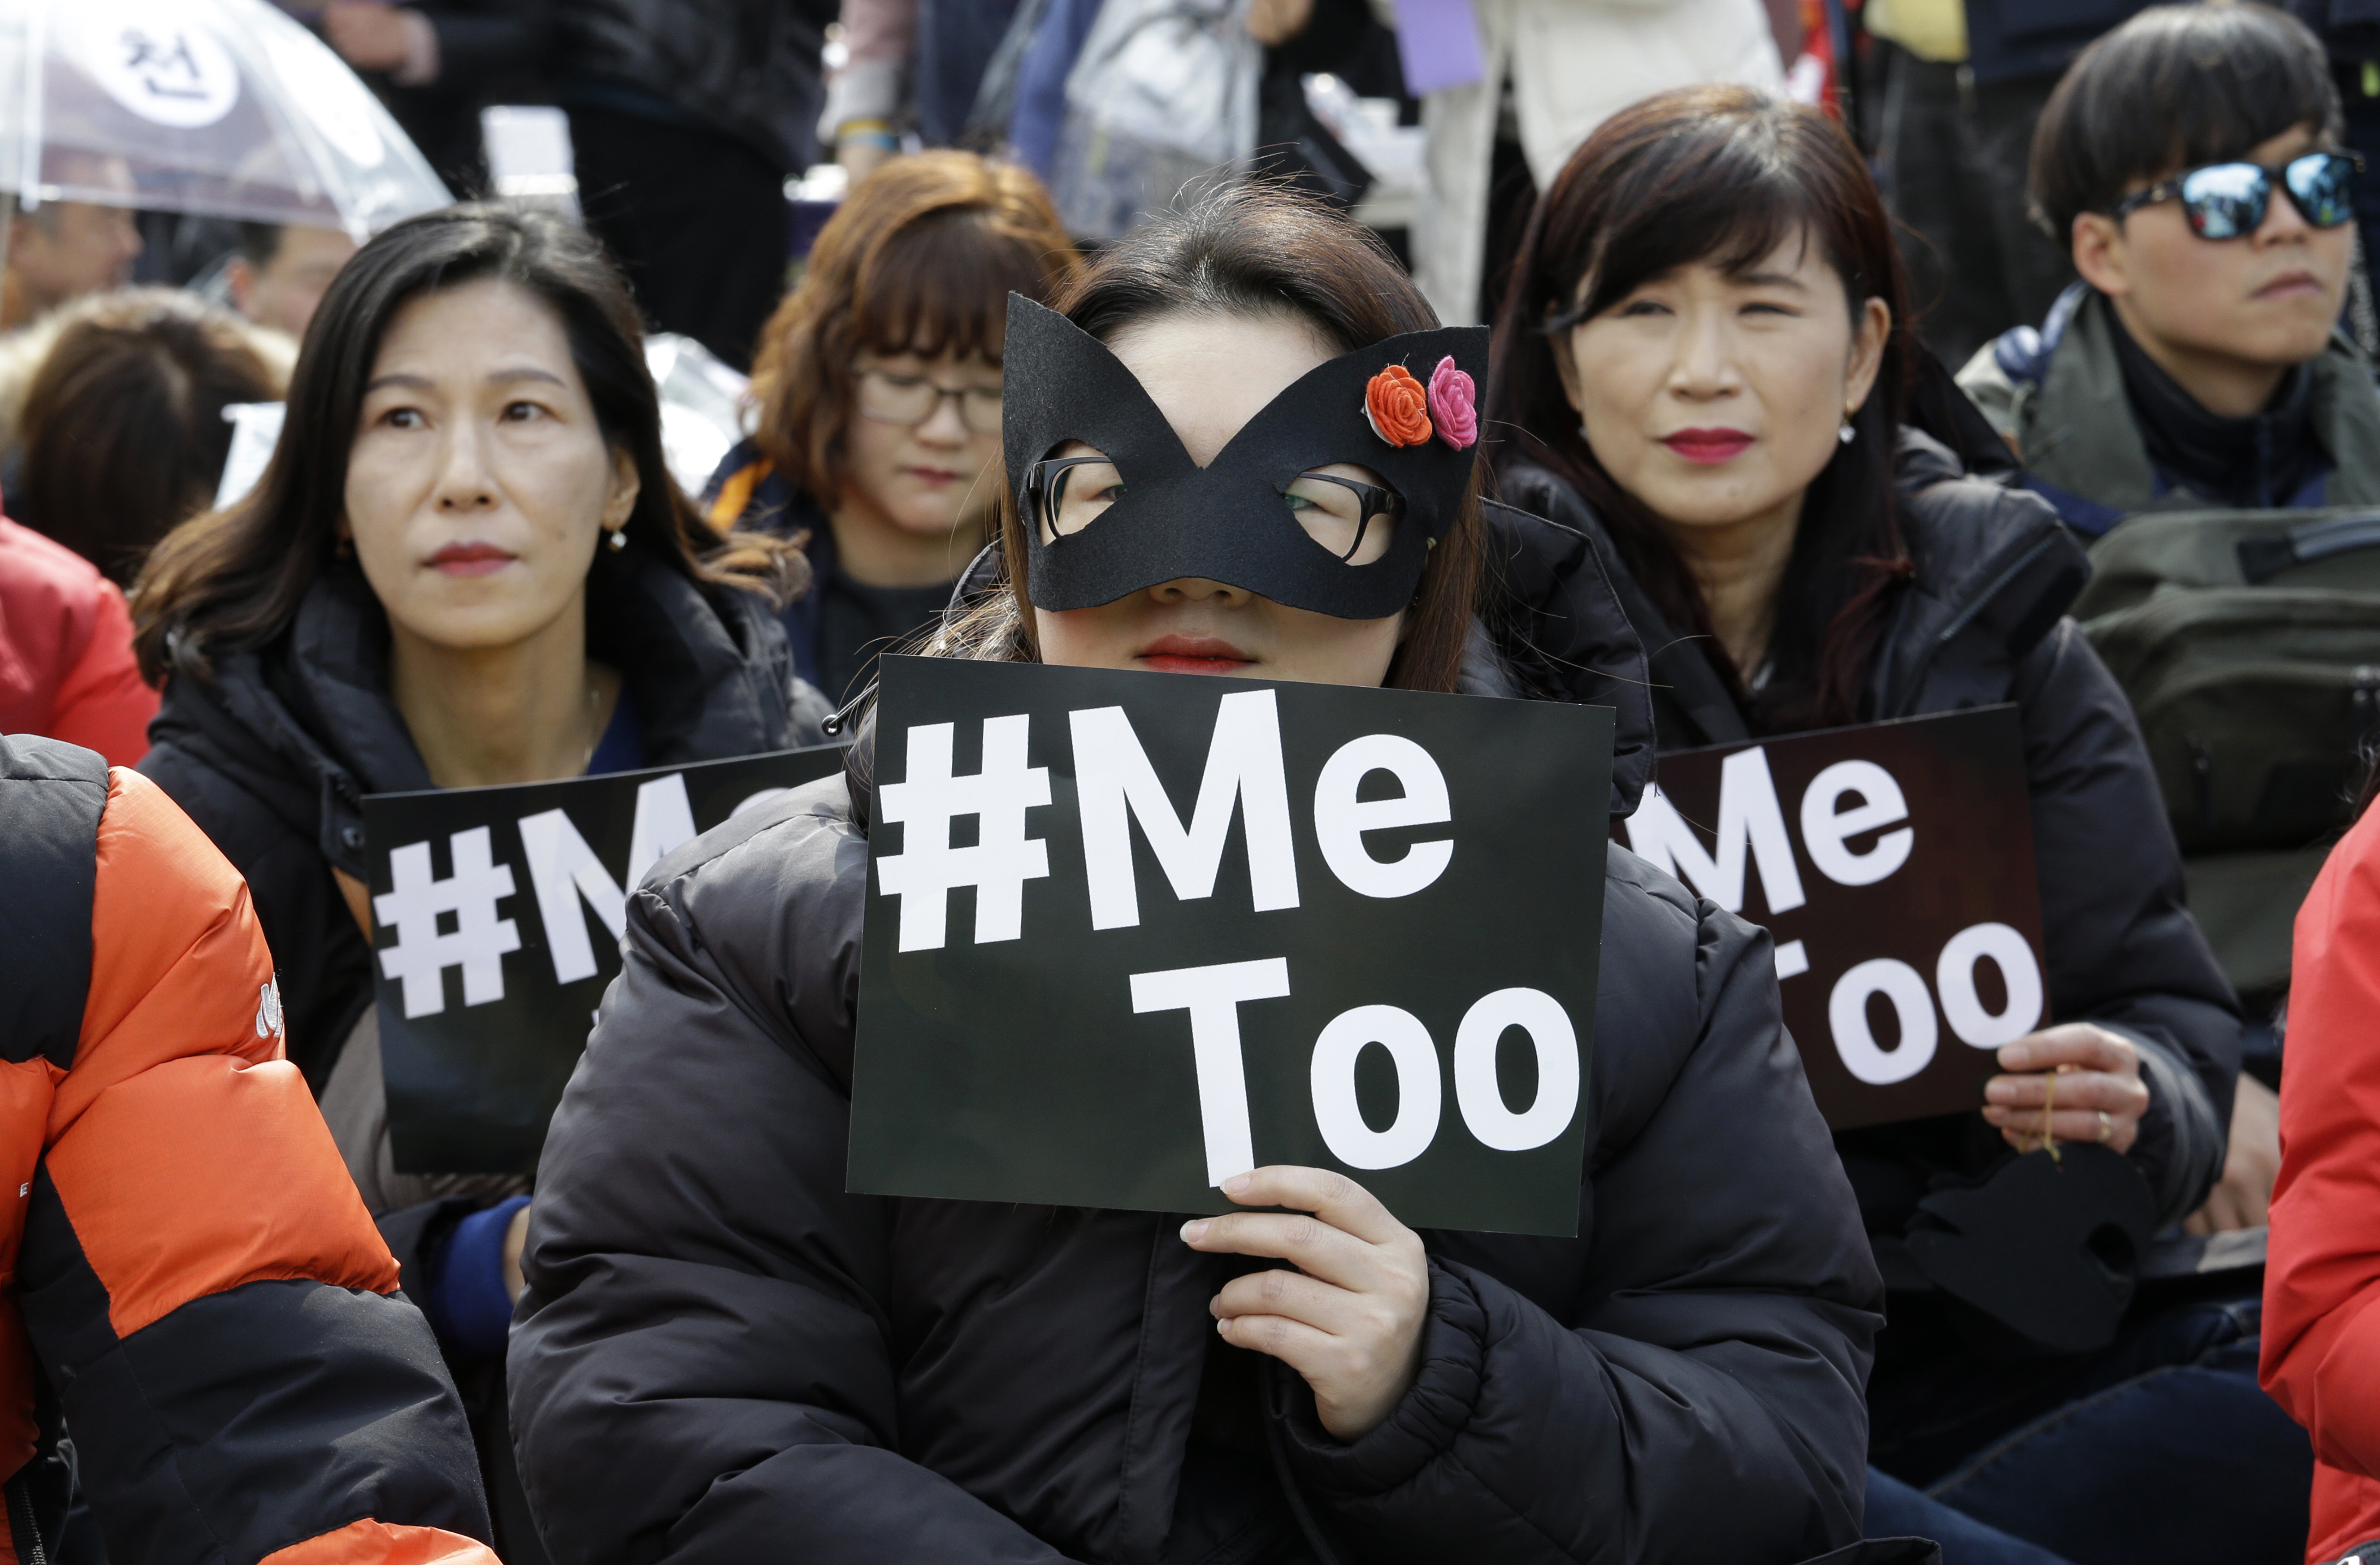 Female workers supporting the MeToo movement wearing black attend a rally to mark the International Women's Day in Seoul, South Korea, Thursday, March 8, 2018. (AP Photo/Ahn Young-joon)